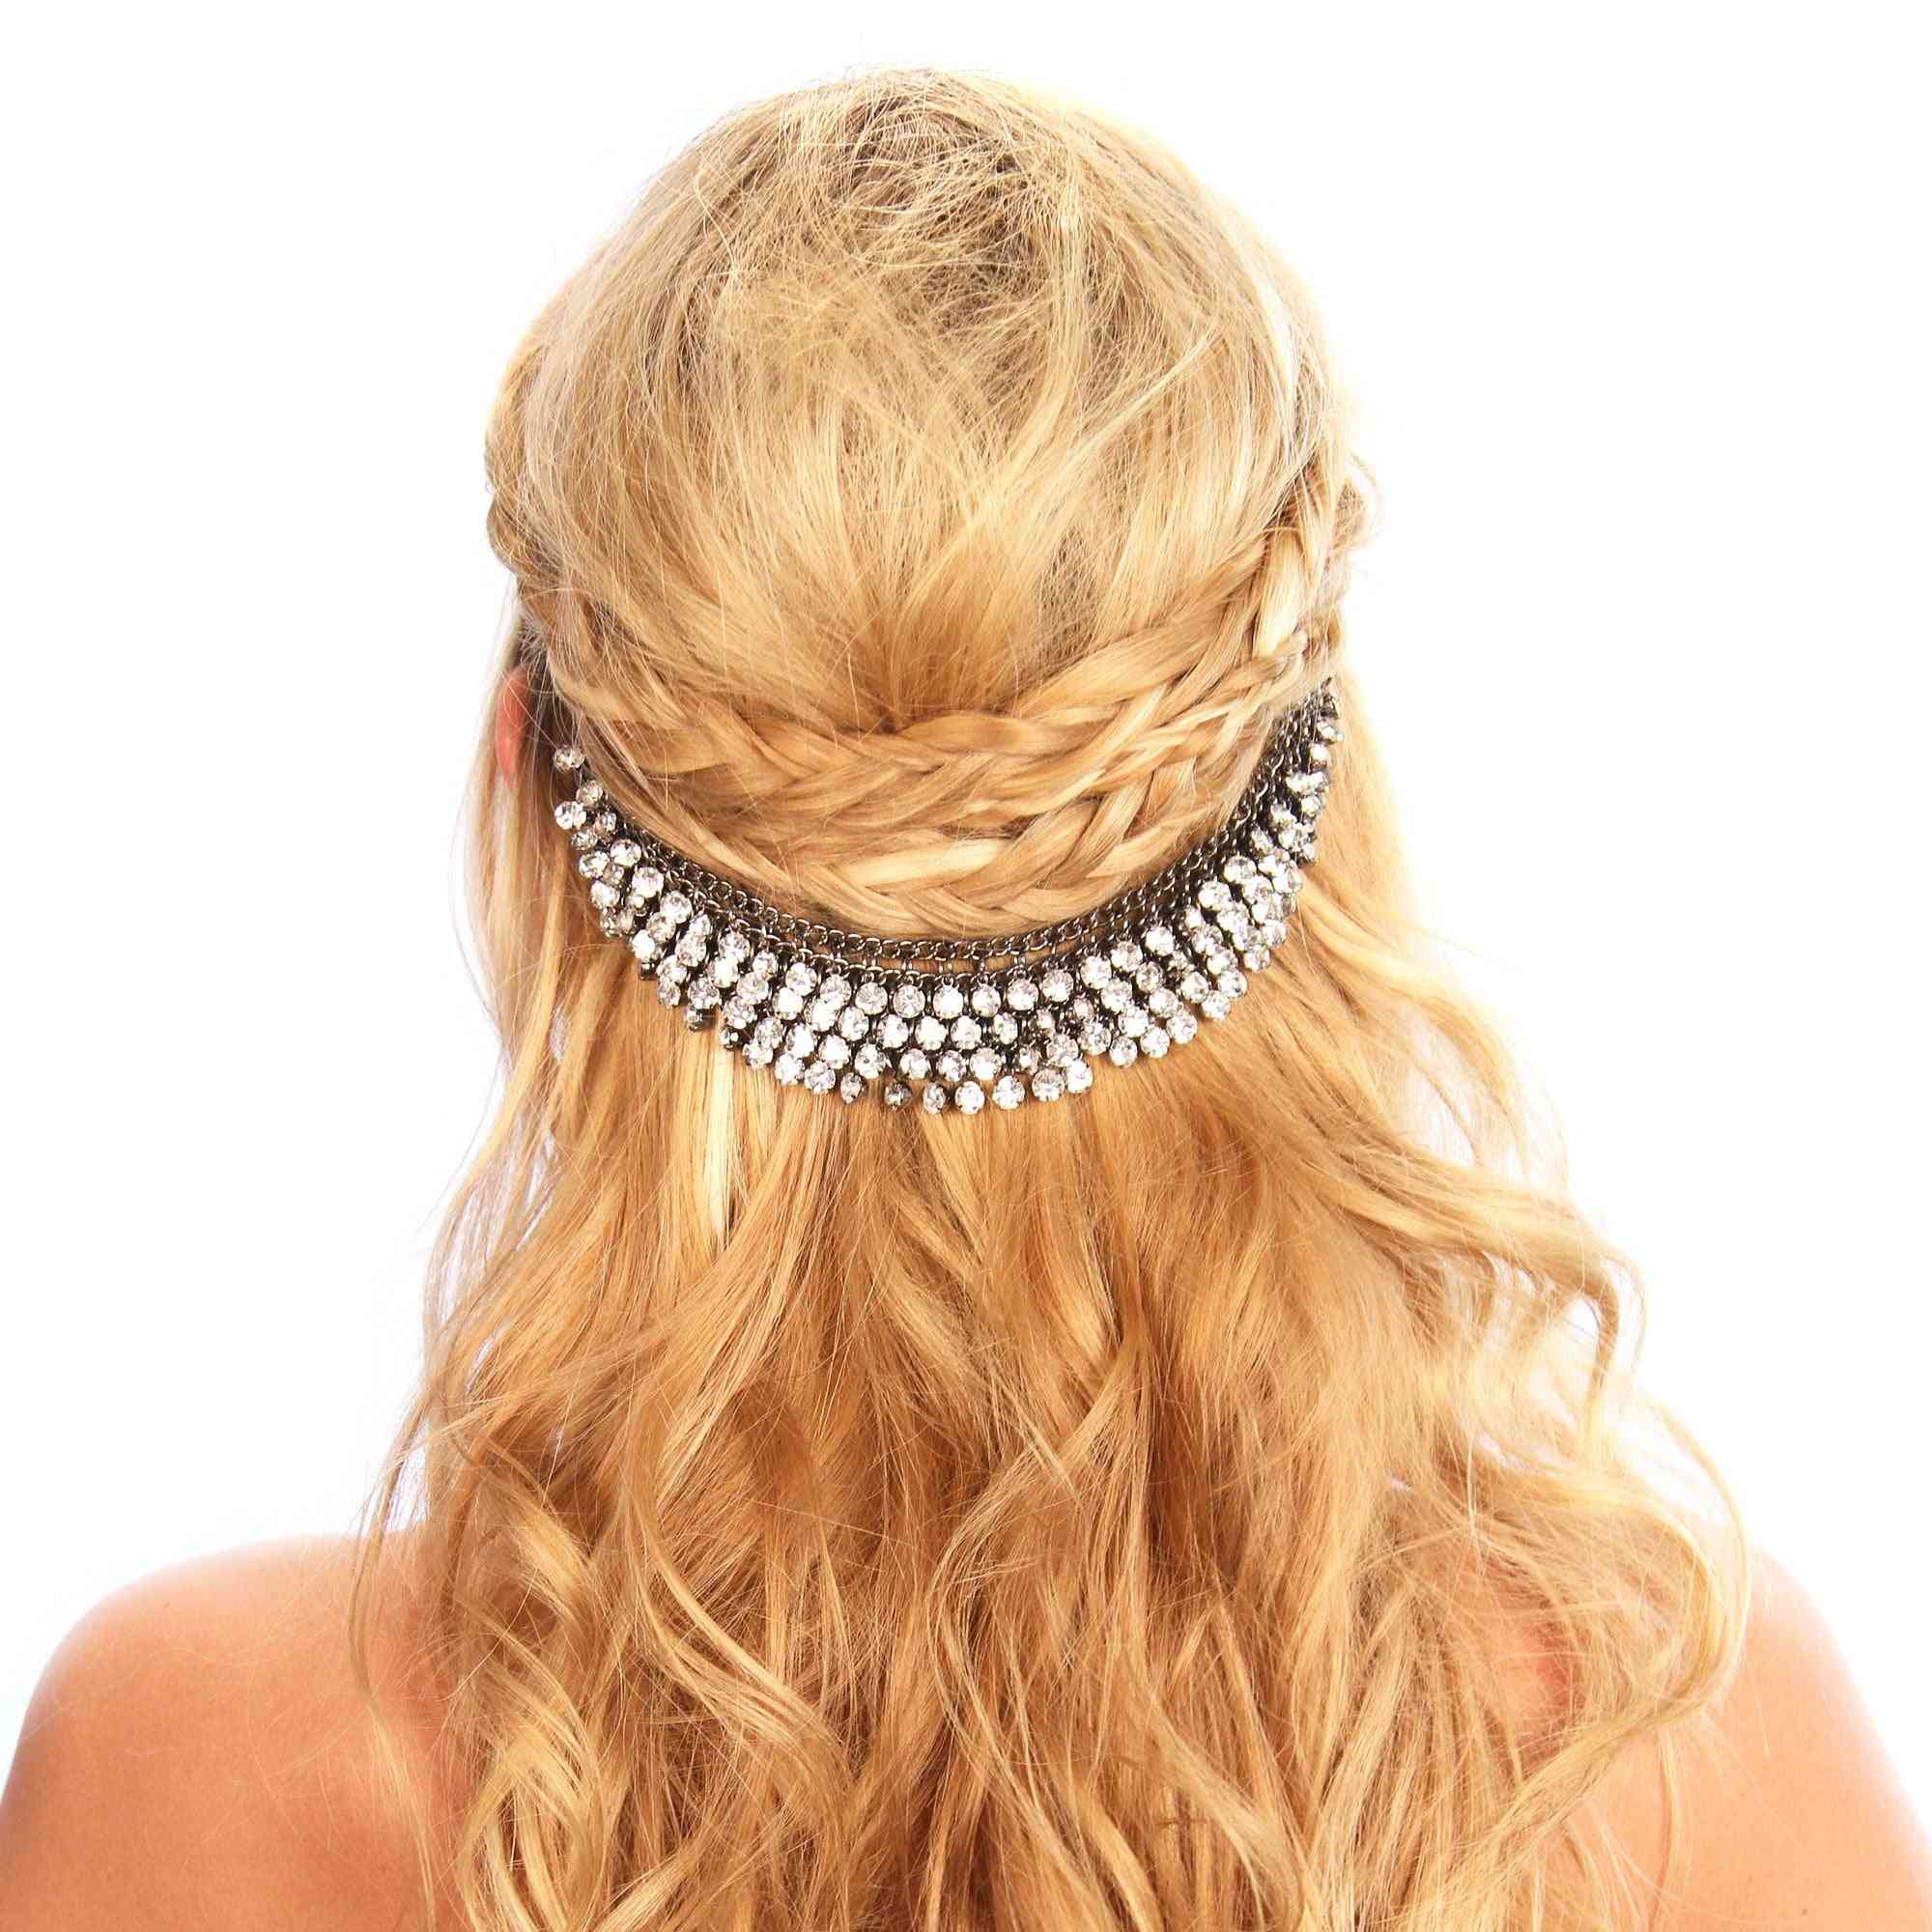 Sparkling Crystal Hair Grip Band With Metal Clamp